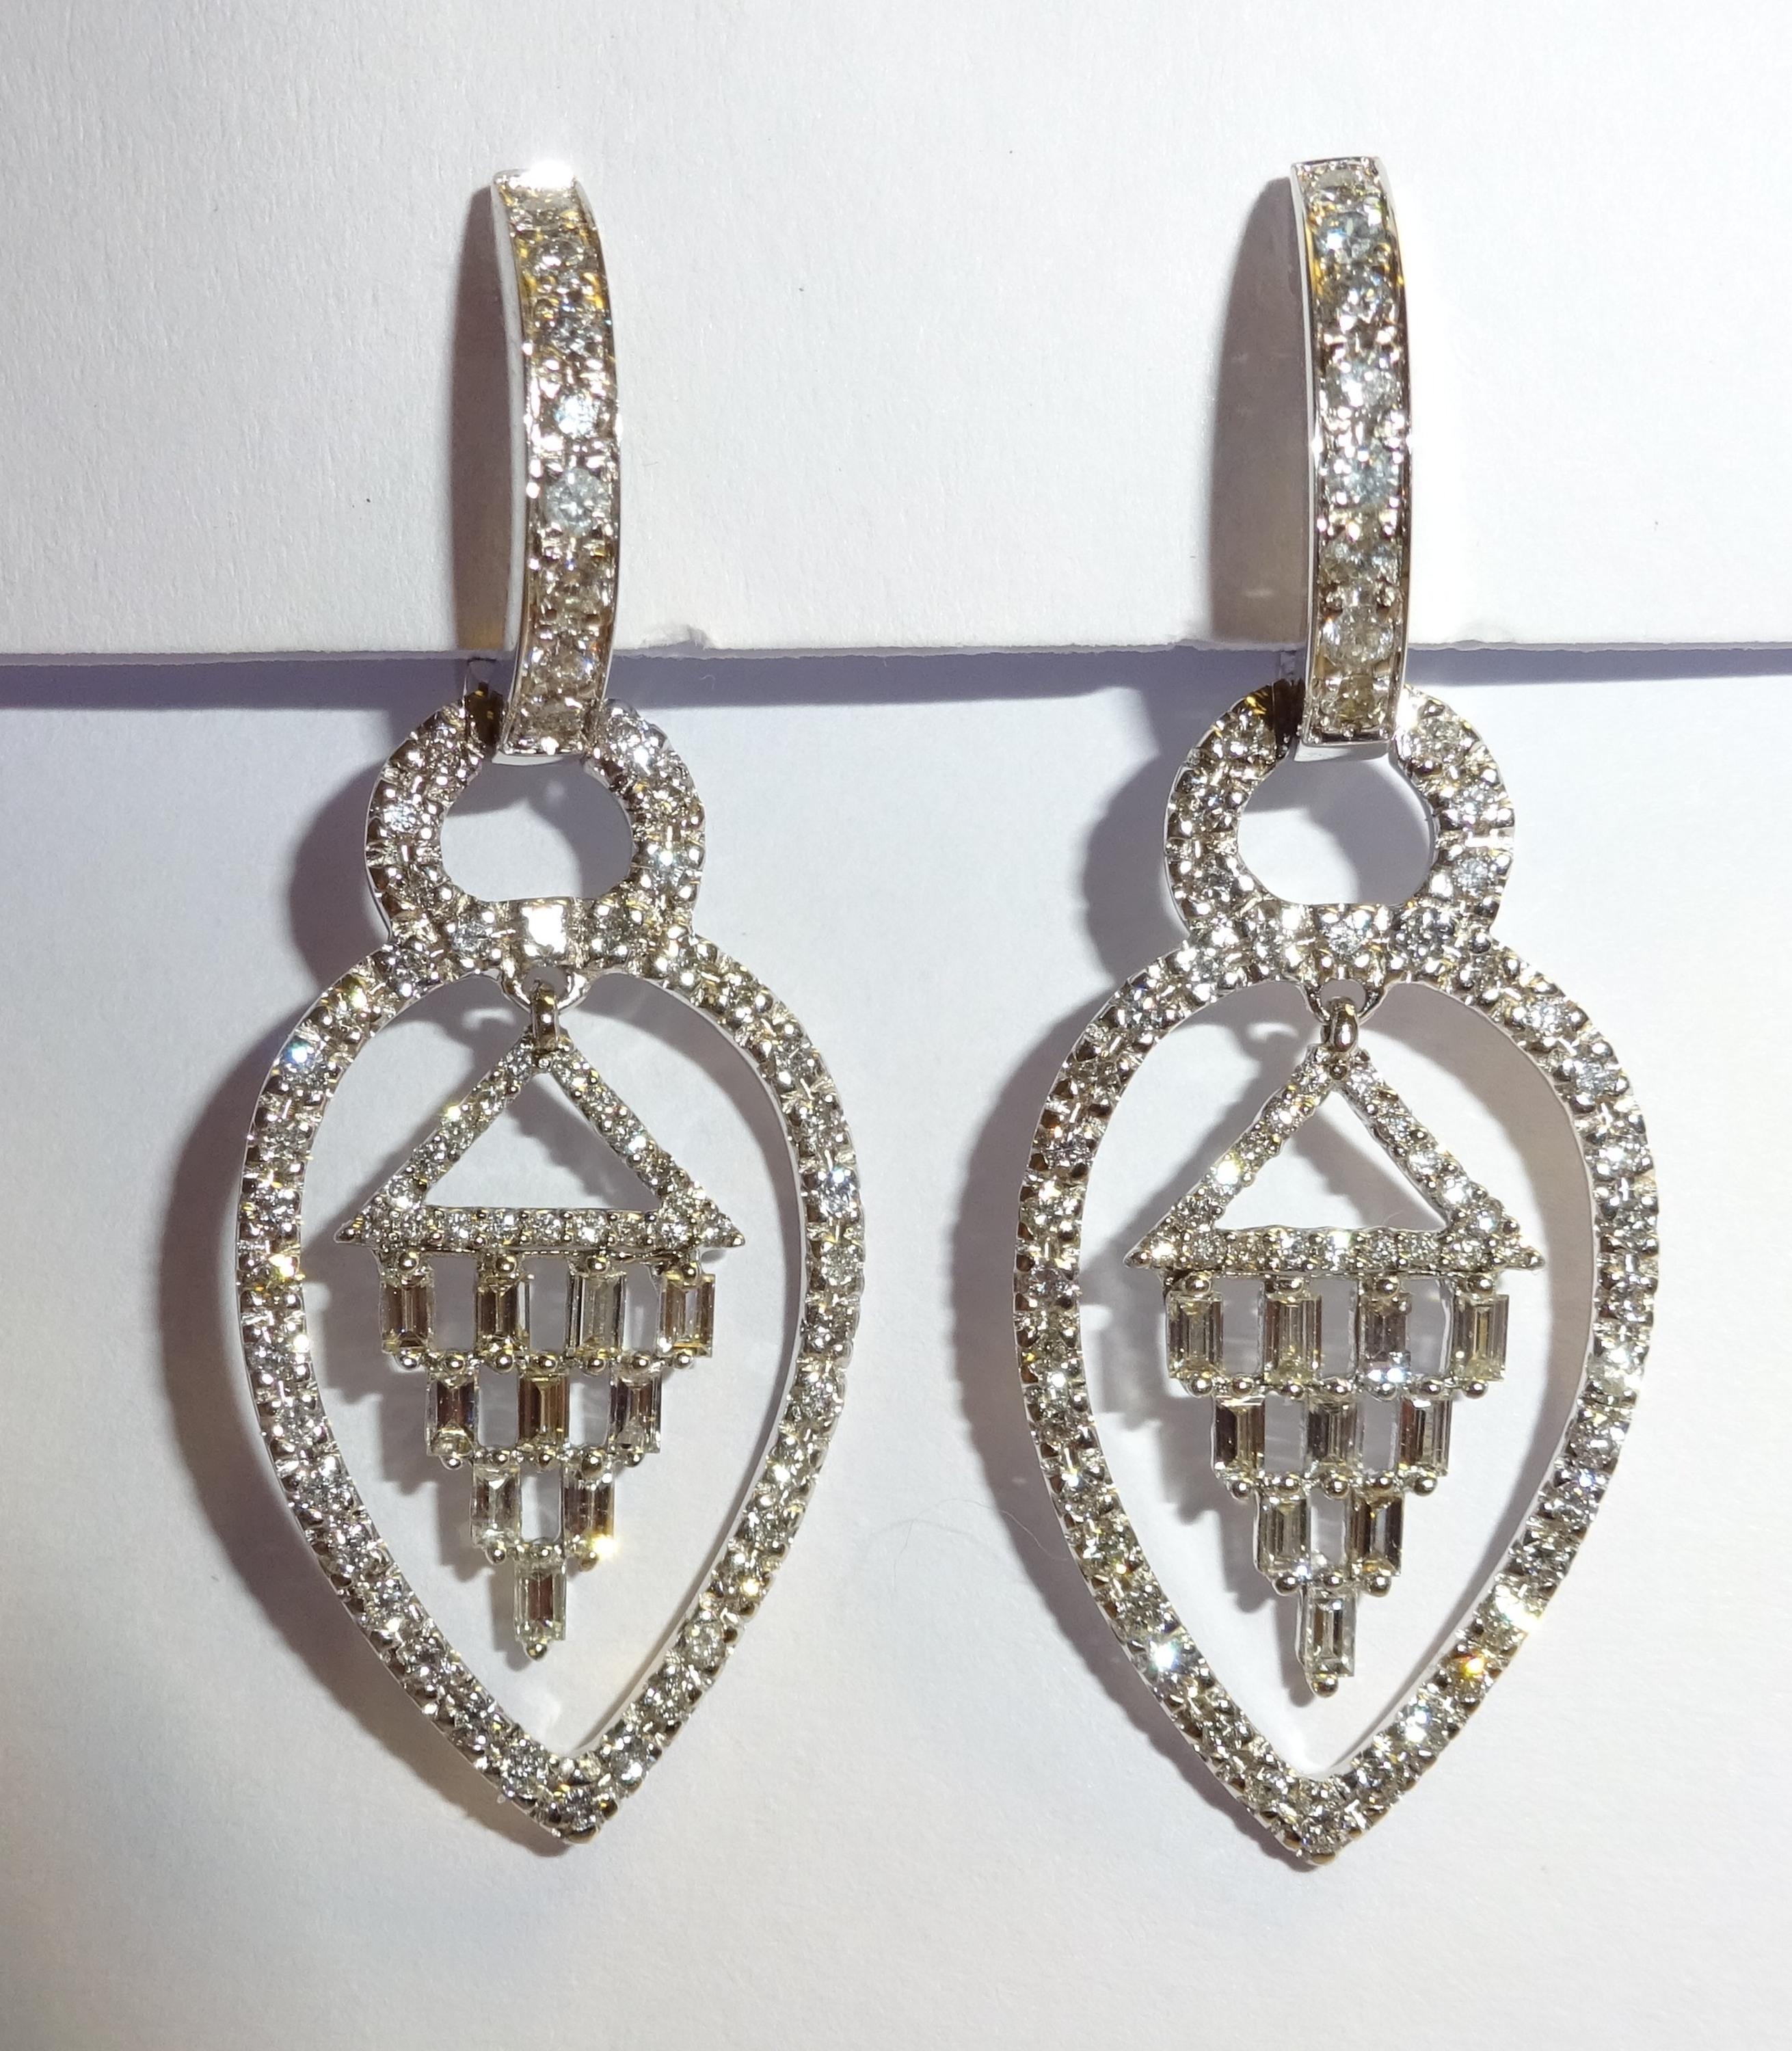 18 Karat White Gold Diamond Dangle Earrings


75  Diamonds 0.72 Carat
20 Diam Bag. 0.32 Carat



Founded in 1974, Gianni Lazzaro is a family-owned jewelery company based out of Düsseldorf, Germany.
Although rooted in Germany, Gianni Lazzaro's style